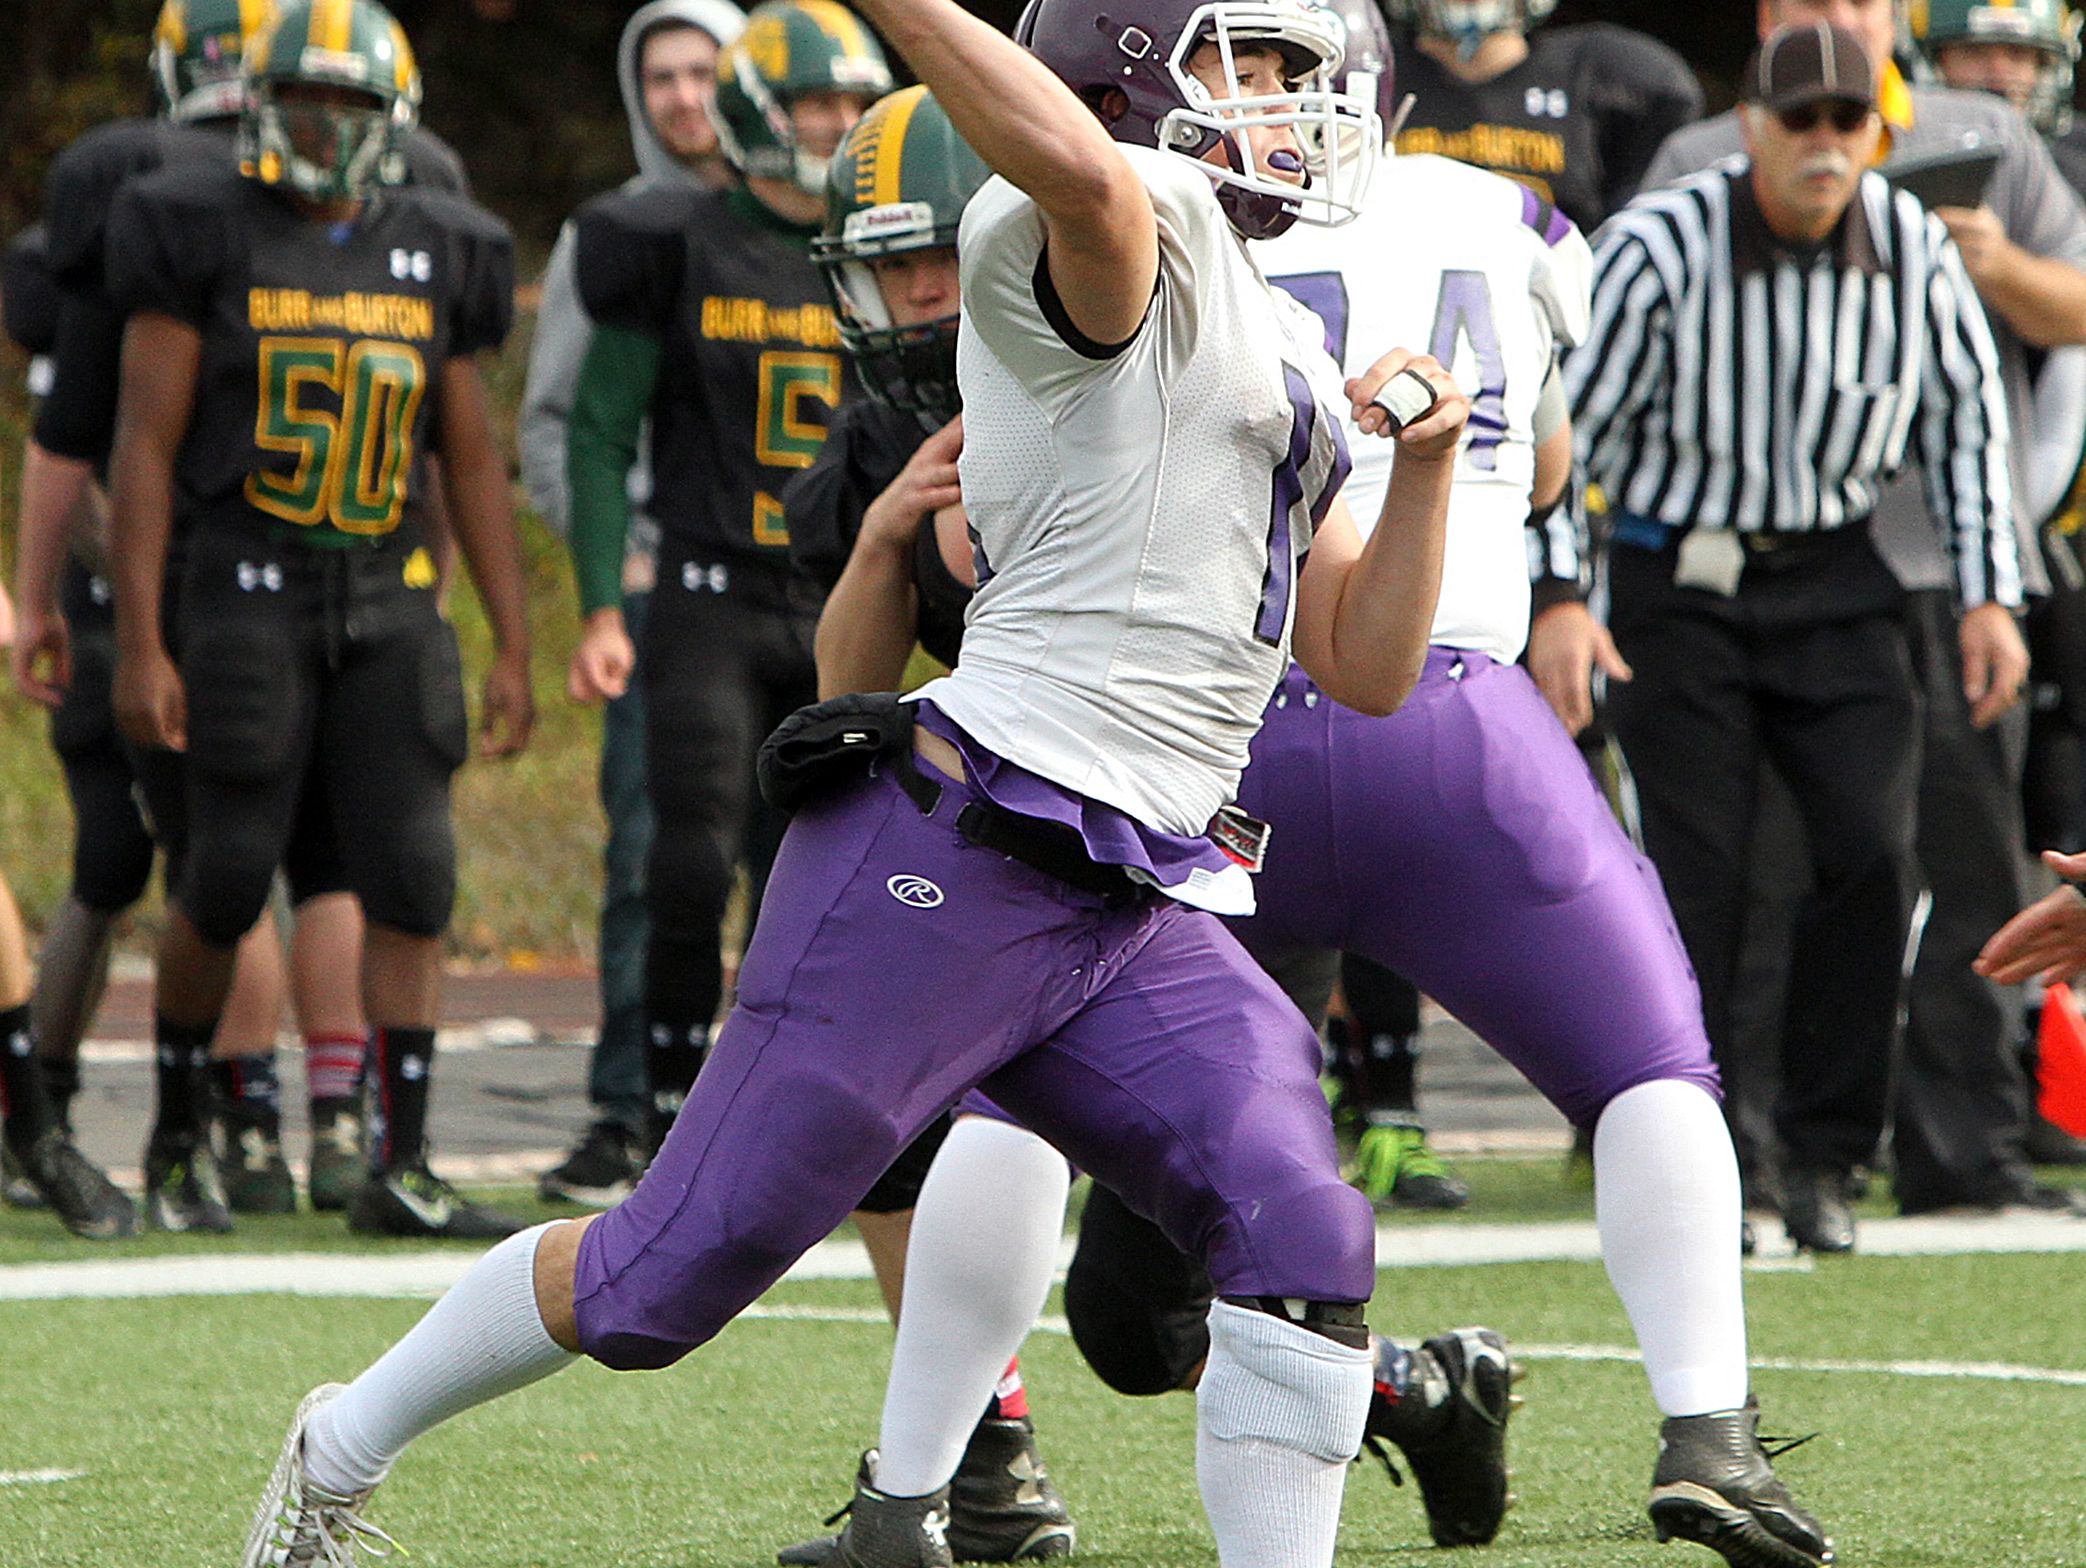 Bellows Falls quarterback Zac Streeter completes a pass in the fourth quarter of the Terriers' 28-7 loss to Burr and Burton in the Division II state high school football championship game on Saturday, Nov. 7, 2015.